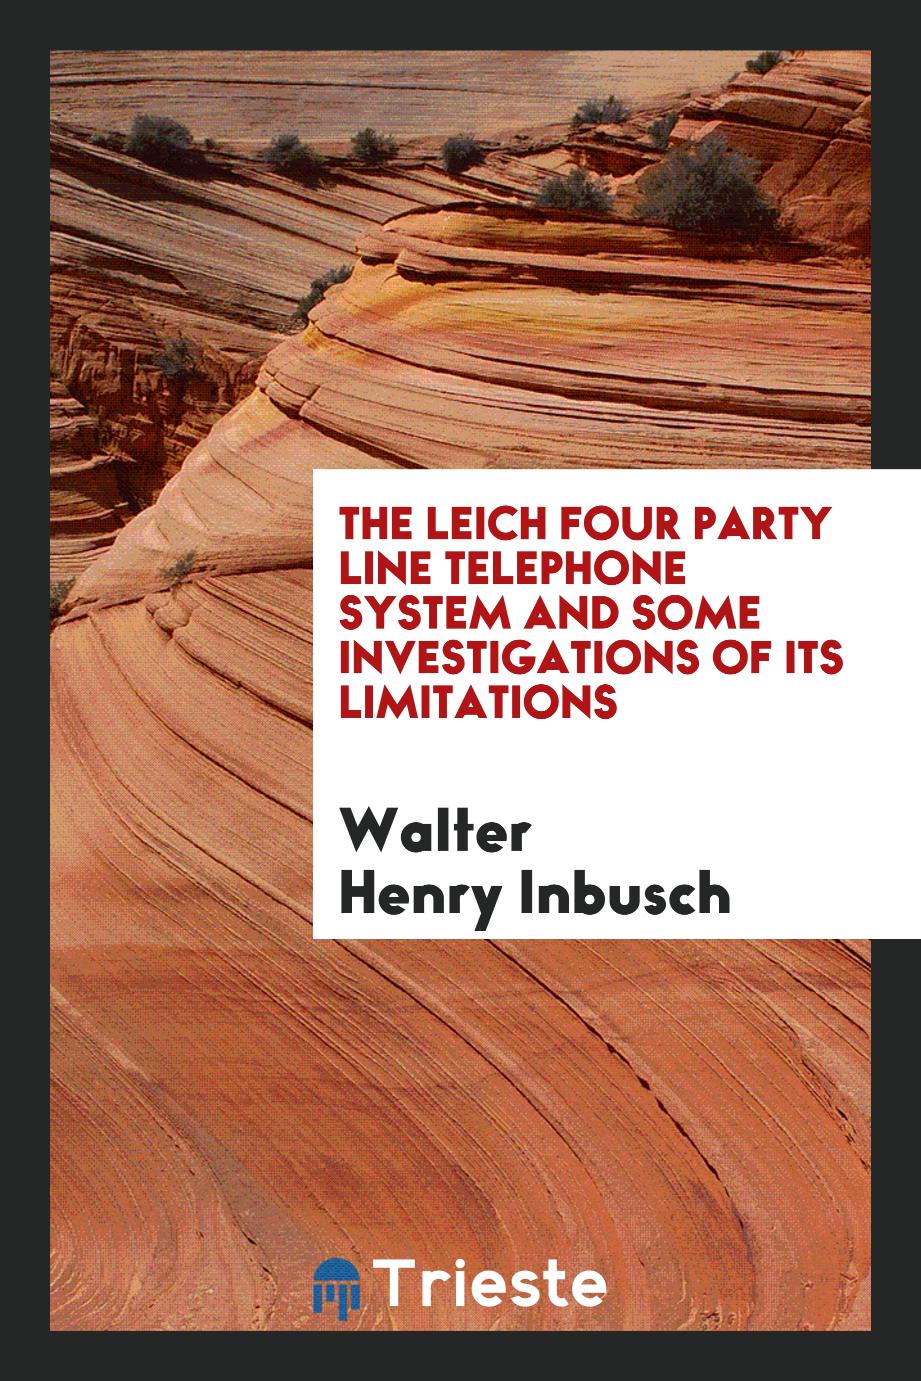 The leich four party line telephone system and some investigations of its limitations